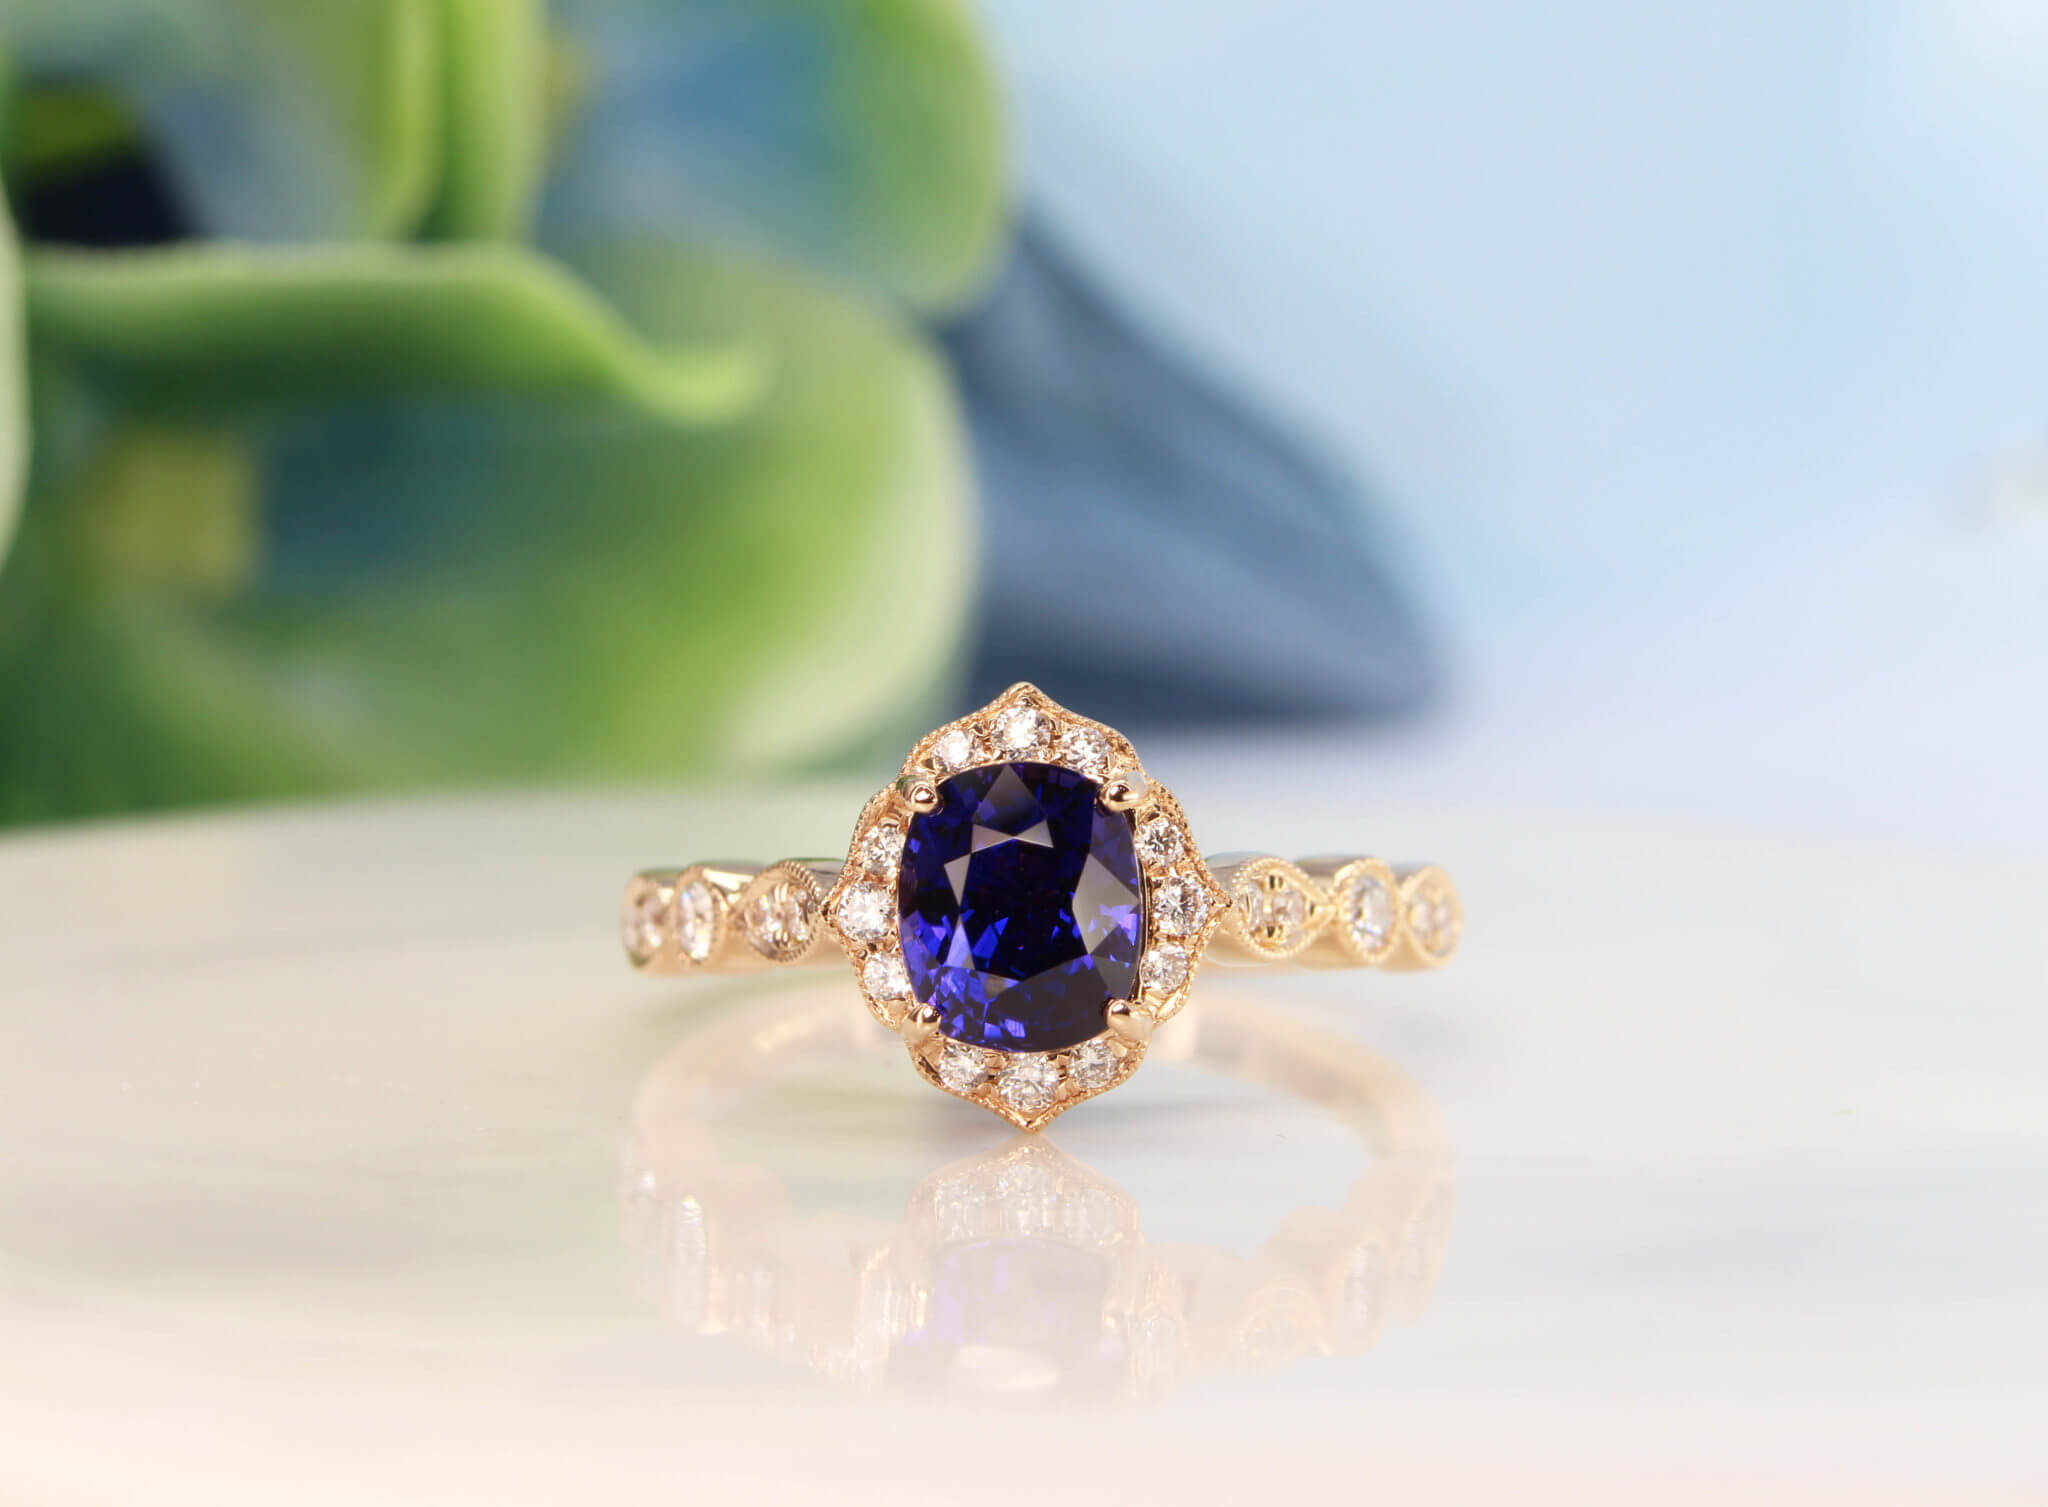 Art deco Proposal Ring with colour change sapphire, surrounded with diamonds to impart a floral and feminine look to this design. This design exudes an overall vintage art deco look with its mil-grain design | Local Singapore Private Jeweller in customised proposal ring.